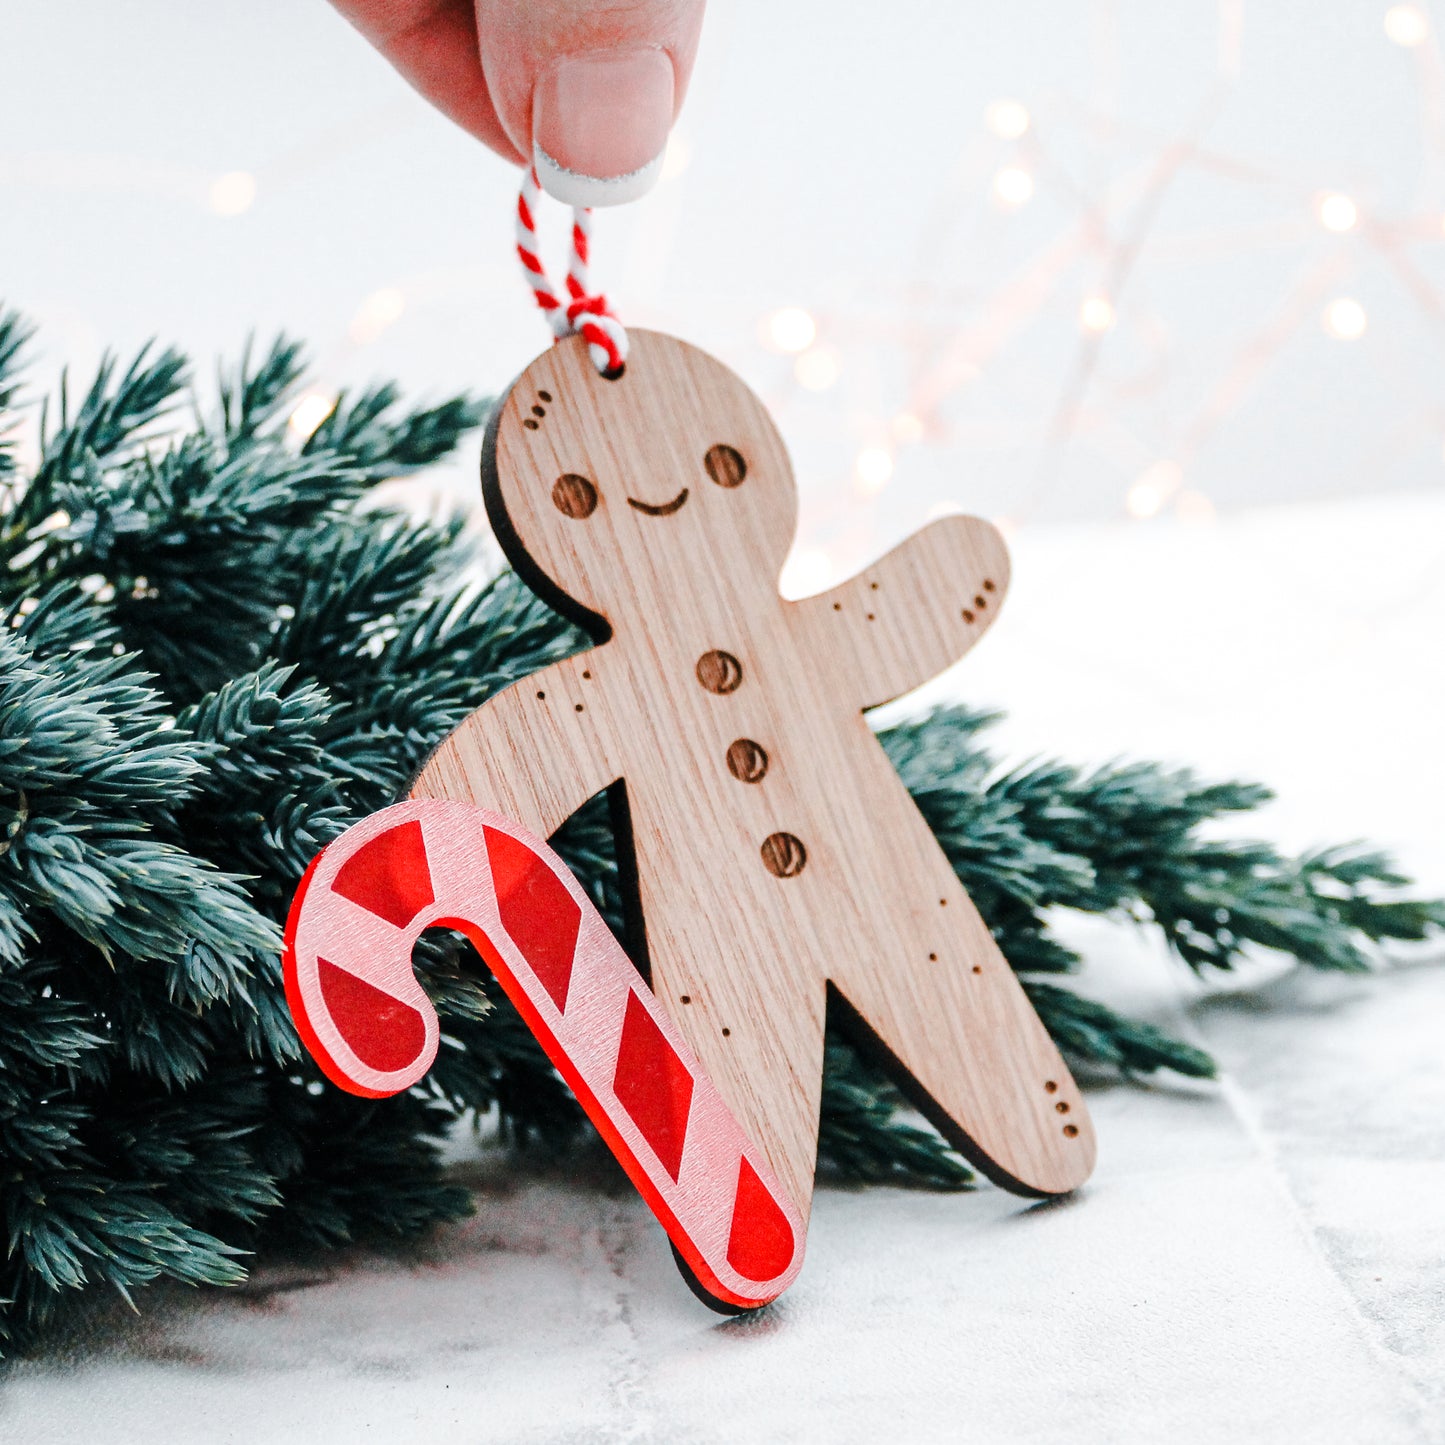 wooden kawaii Gingerbread man Christmas tree decoration with candy cane stick